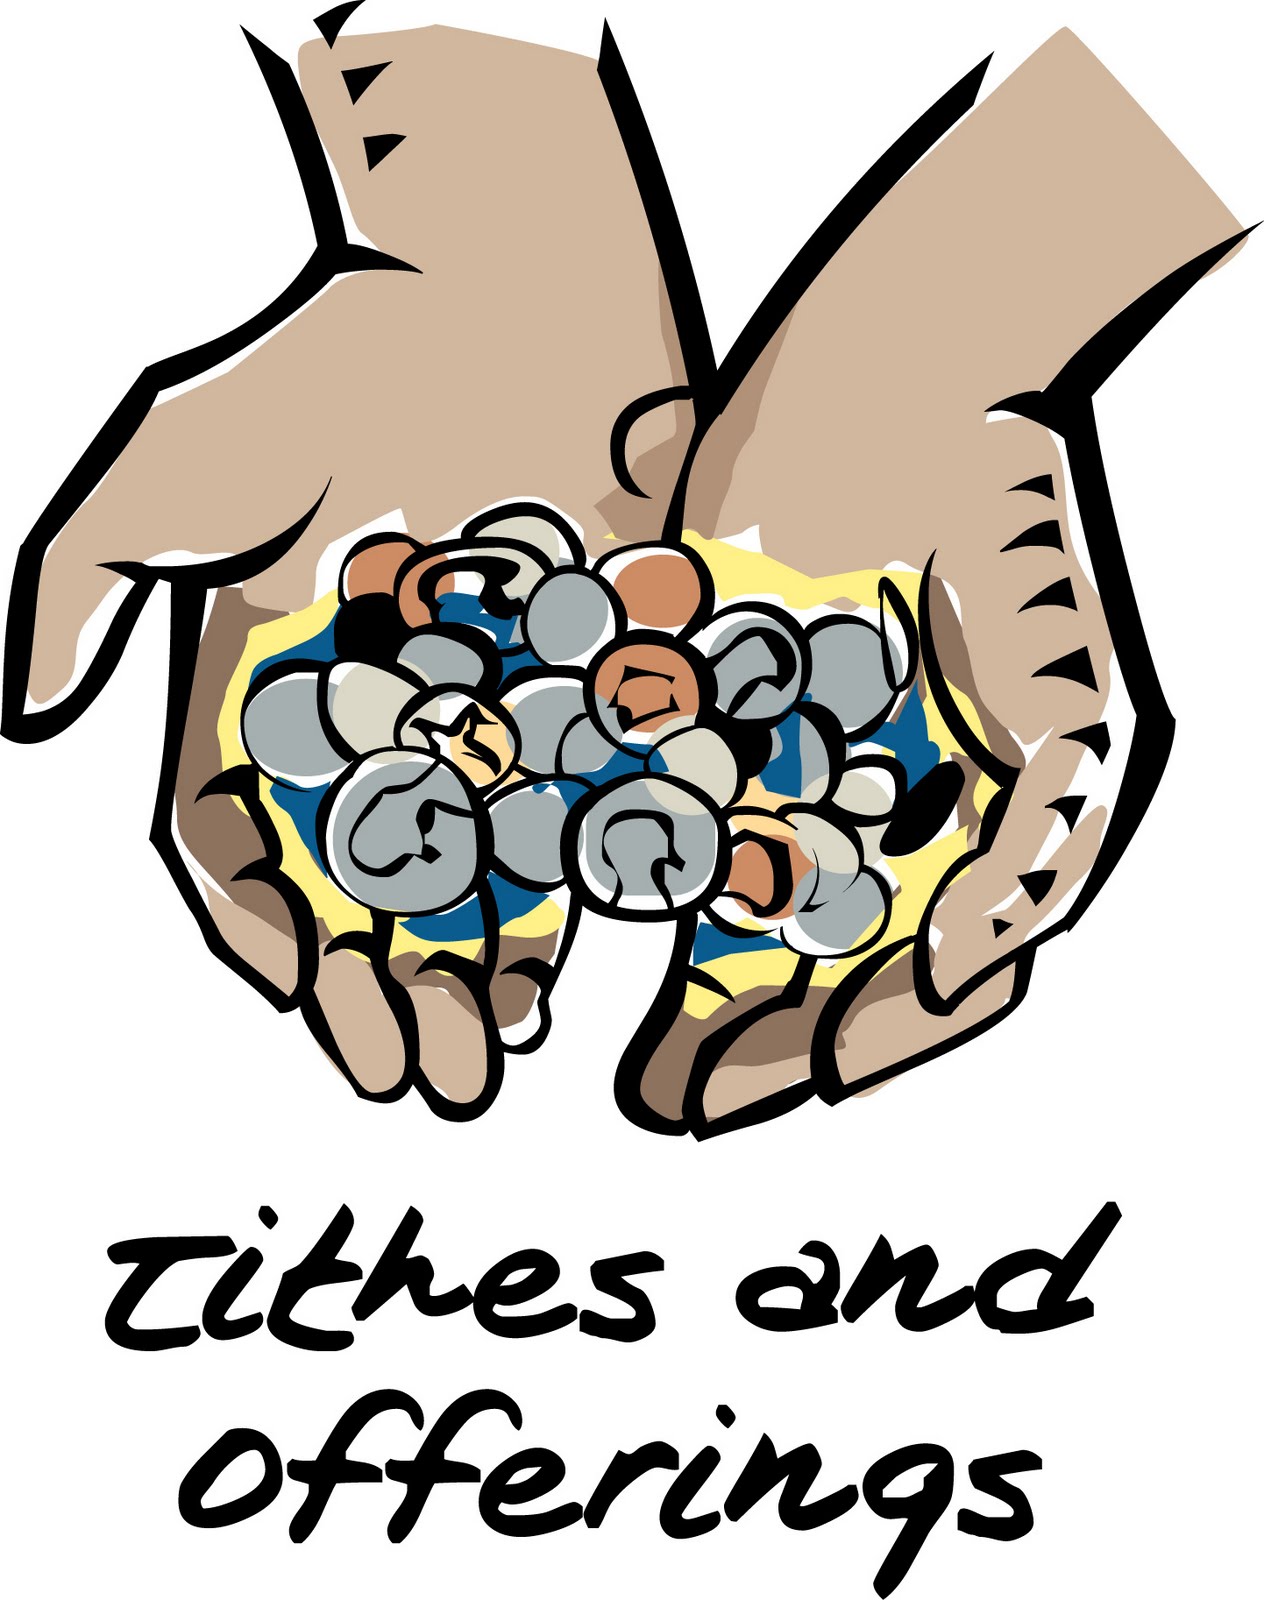 Church Tithes And Offerings Clip Art Church Giving Offering Clip